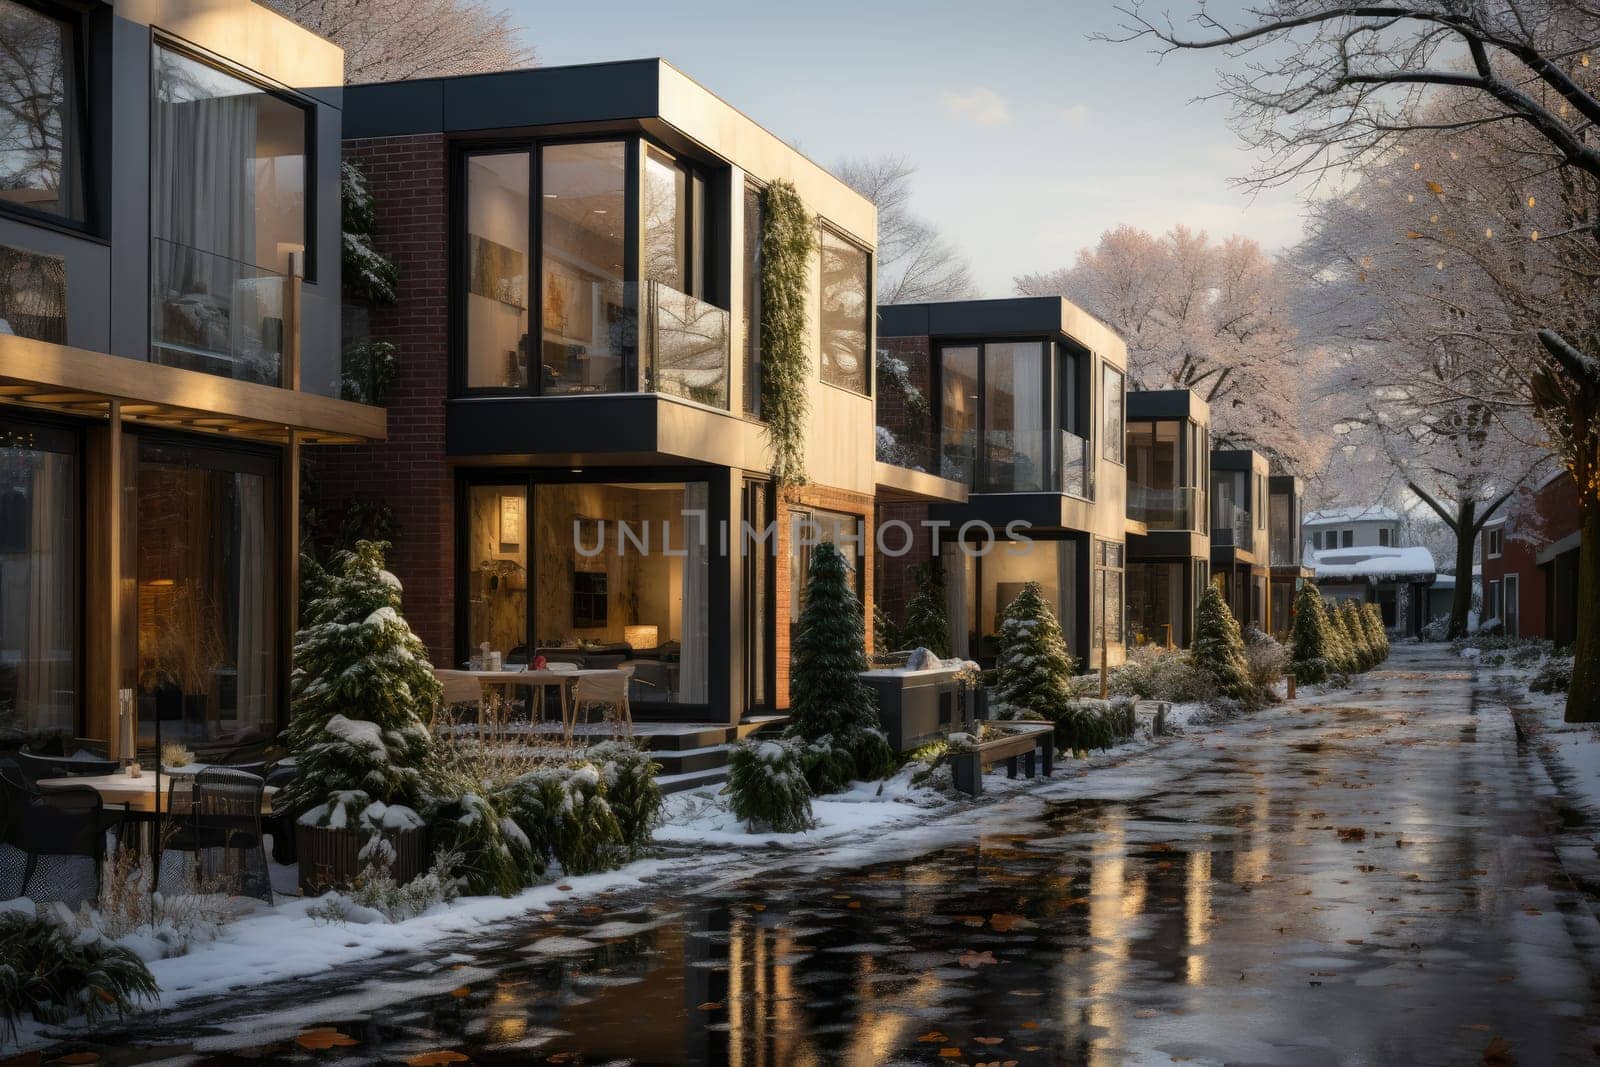 Modern Brick Townhouse: The Magic of Winter Christmas by Yurich32